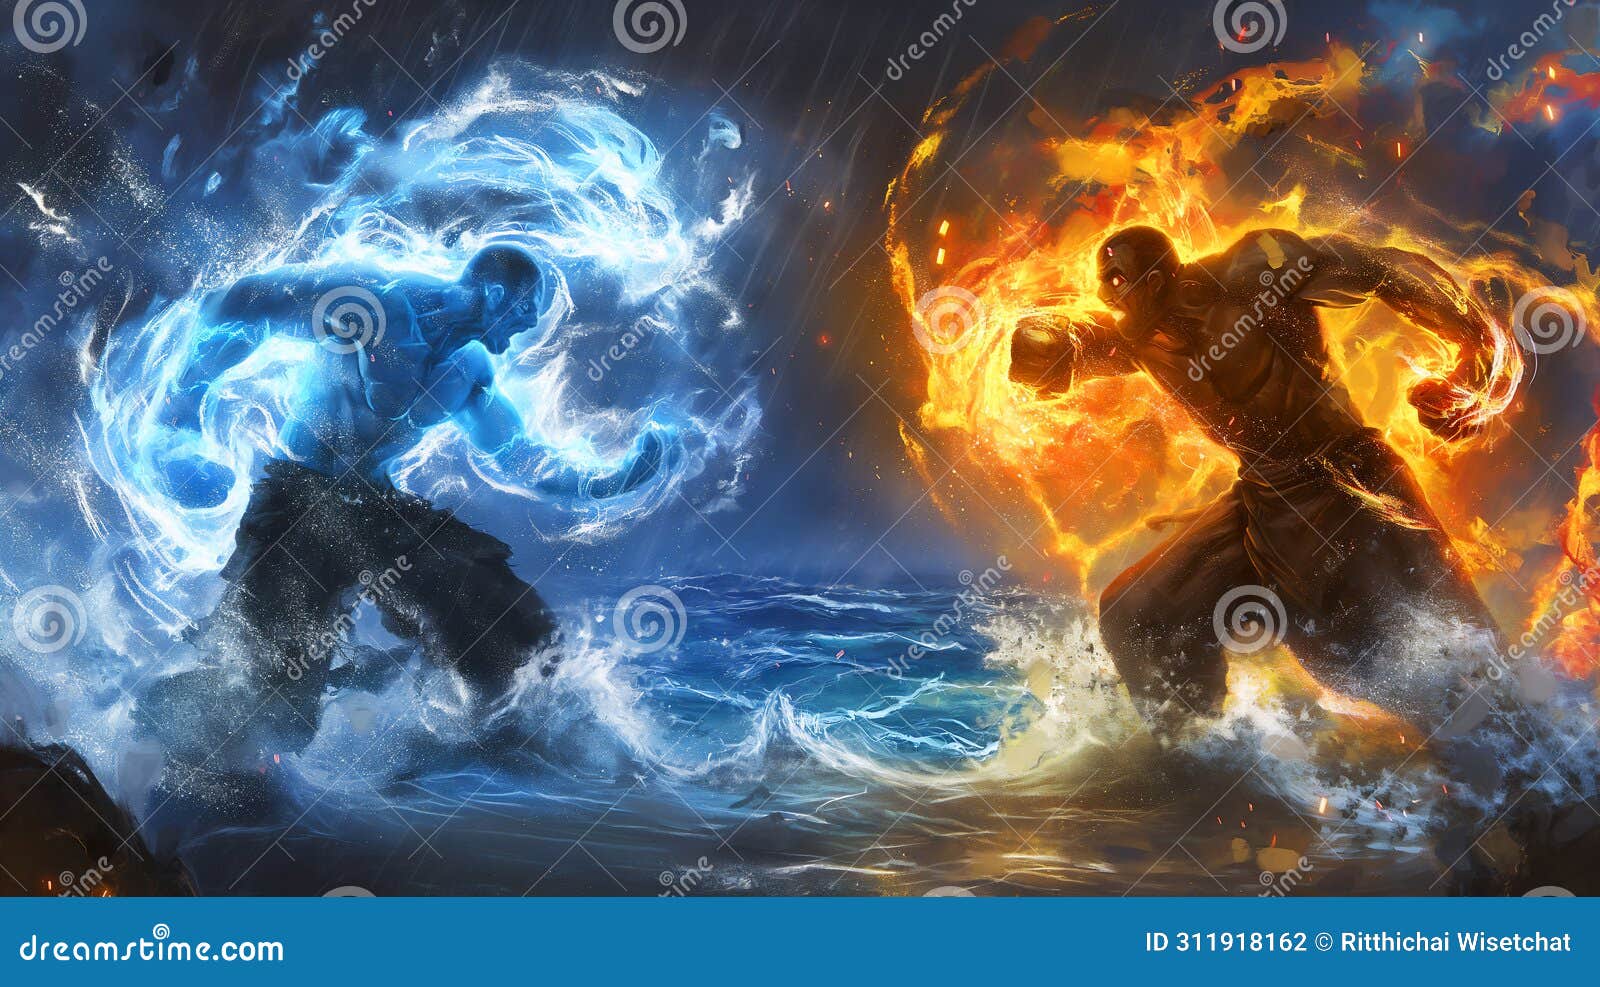 epic battle between two al titans, one wreathed in flames, the other in swirling water, amidst a stormy sea backdrop.